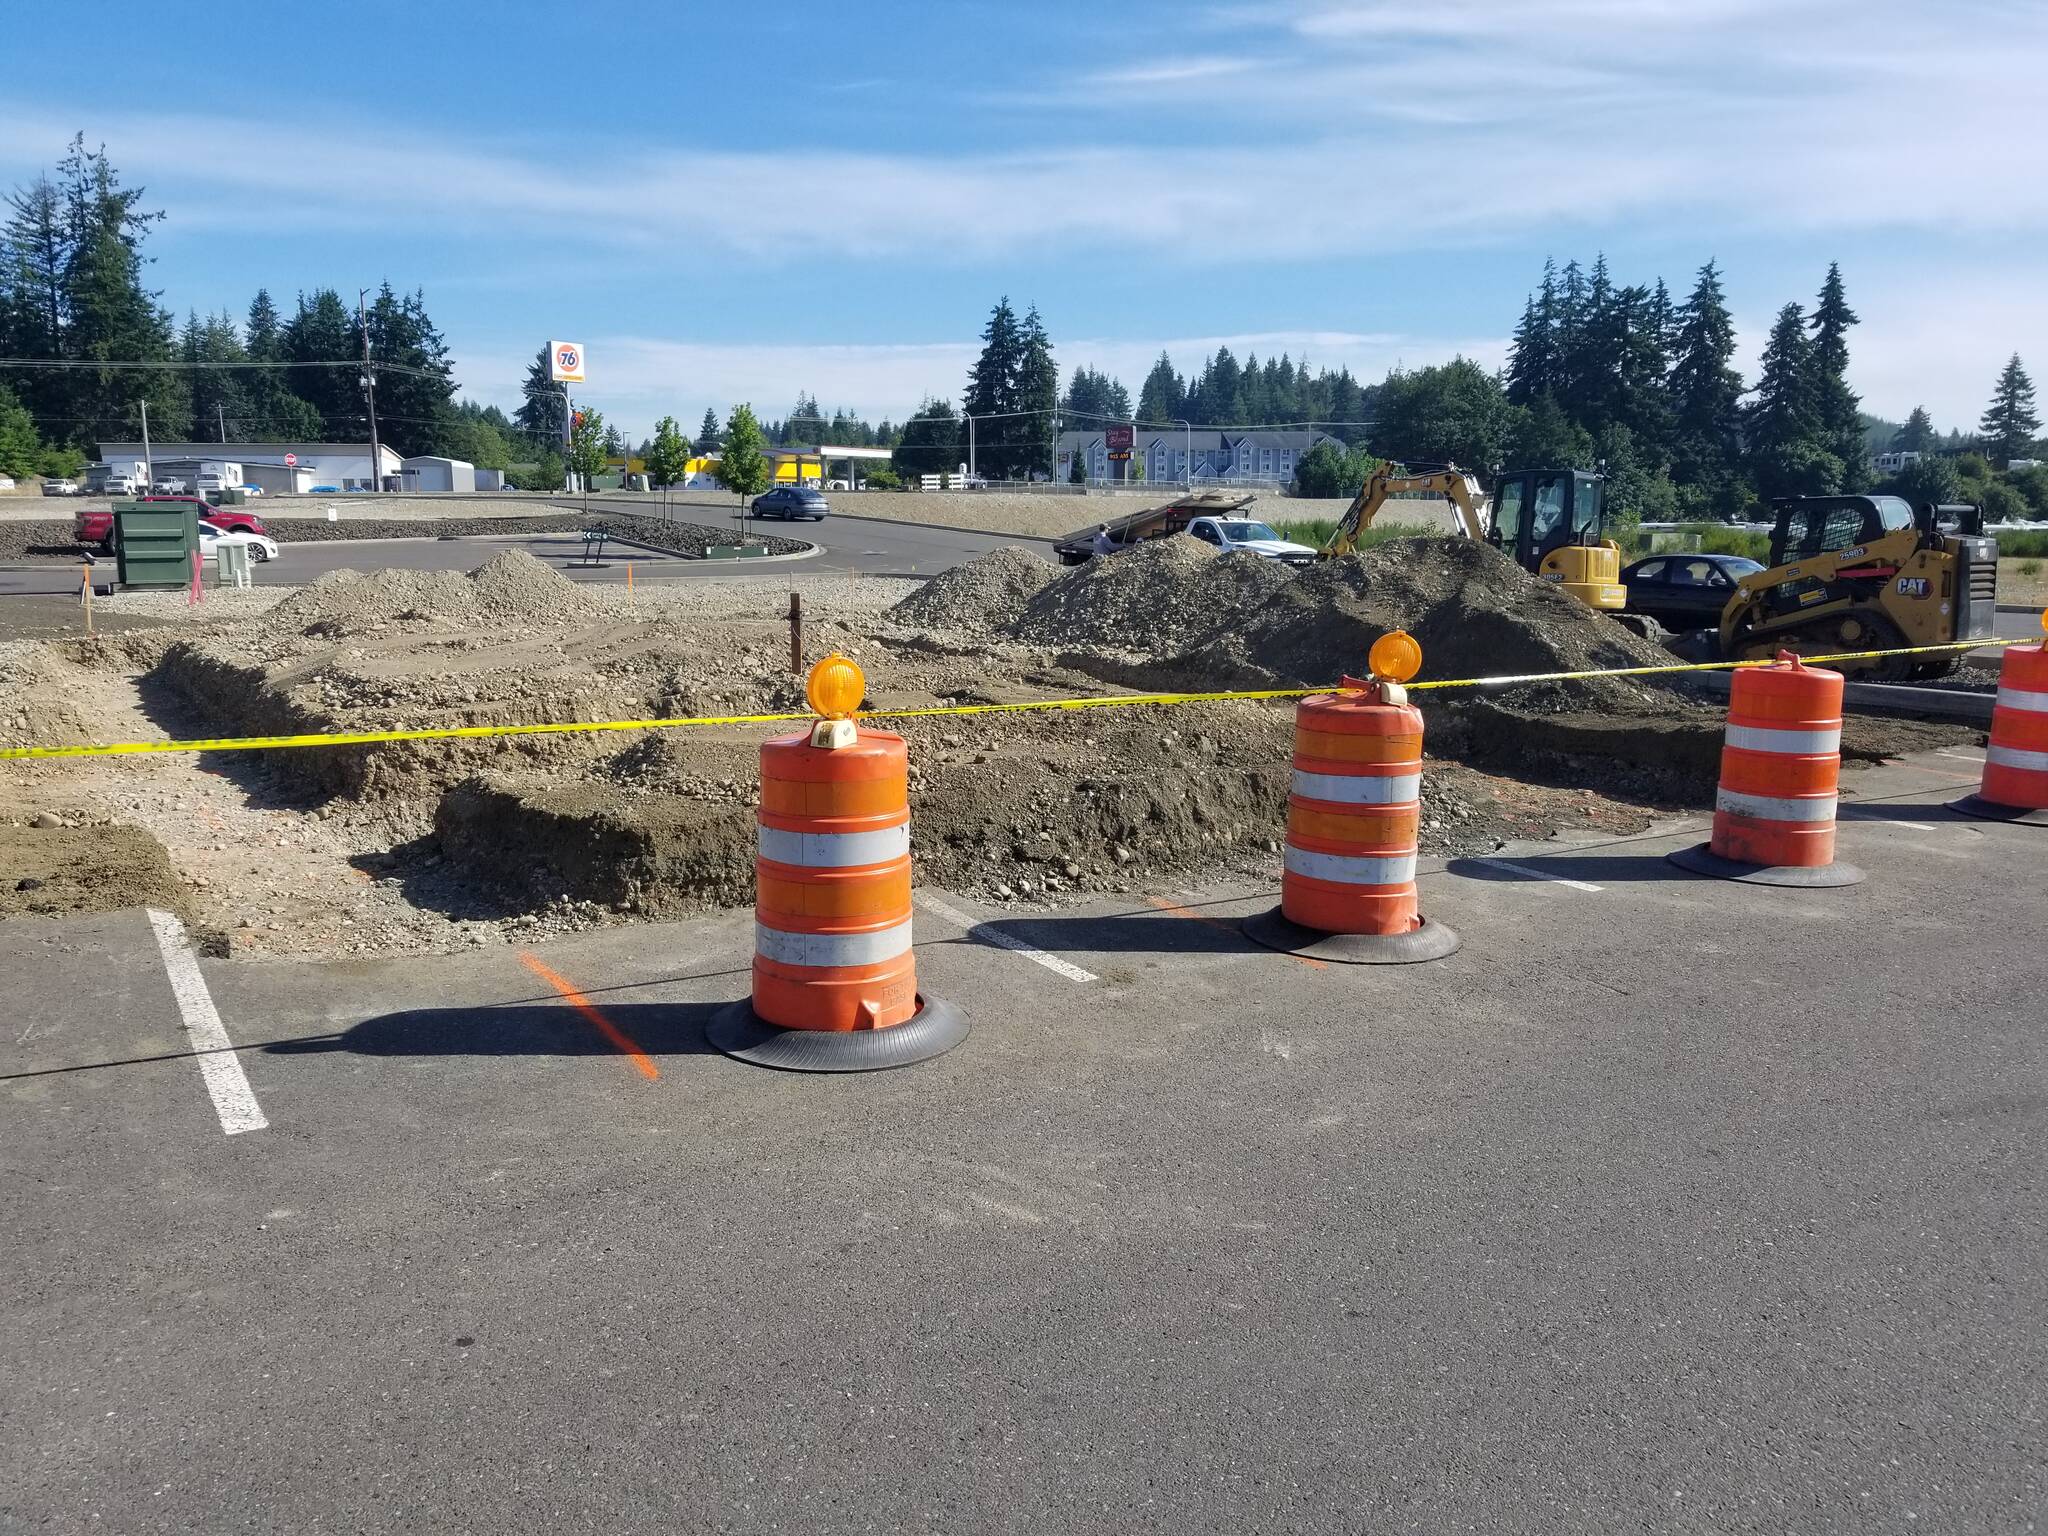 Allen Leister | The Daily World
Construction for the Arby’s began in Eagles Landing as ground was broken July 1, 2022, in Elma. The project is expected to be completed by November 2022 and will be adjacent to the neighboring Starbucks building.